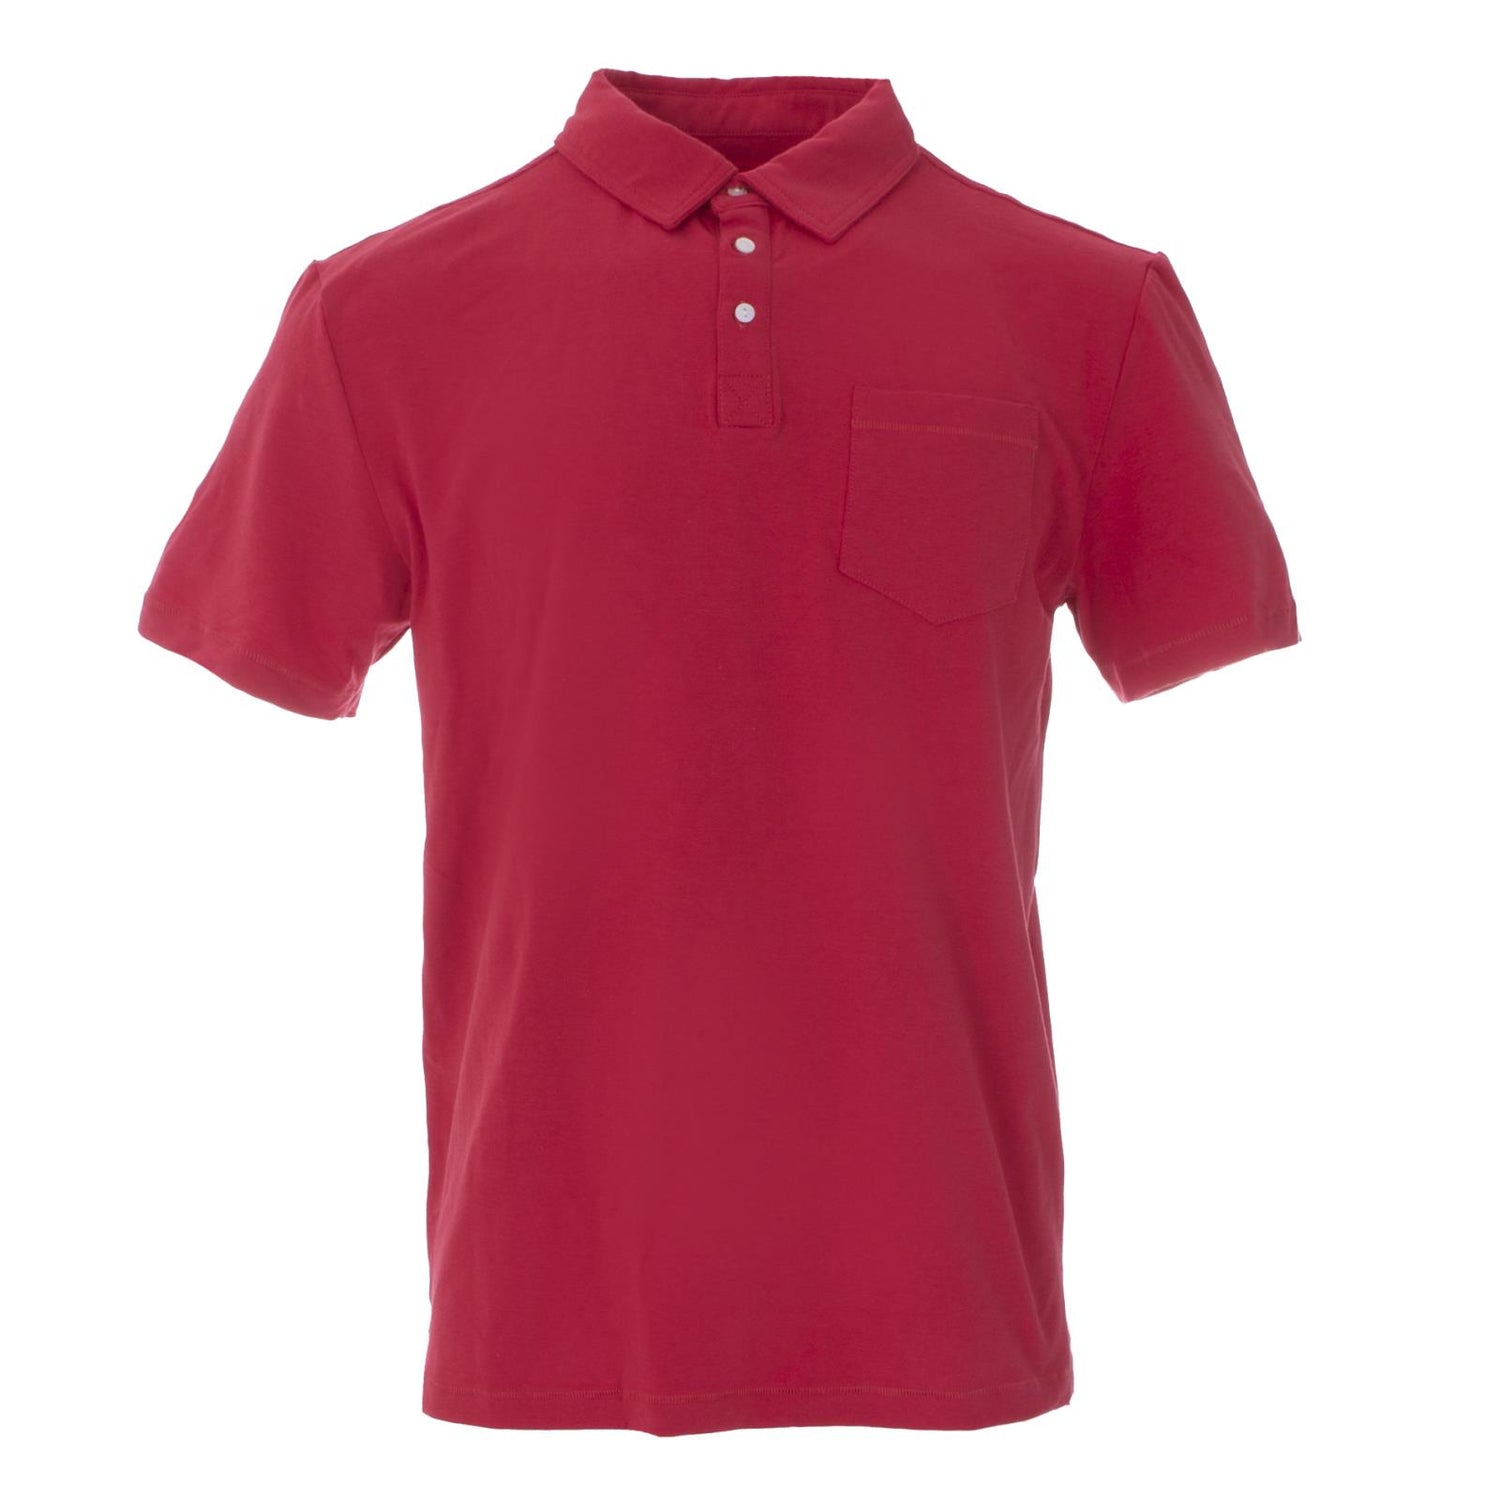 Men's Short Sleeve Luxe Jersey Polo in Flag Red